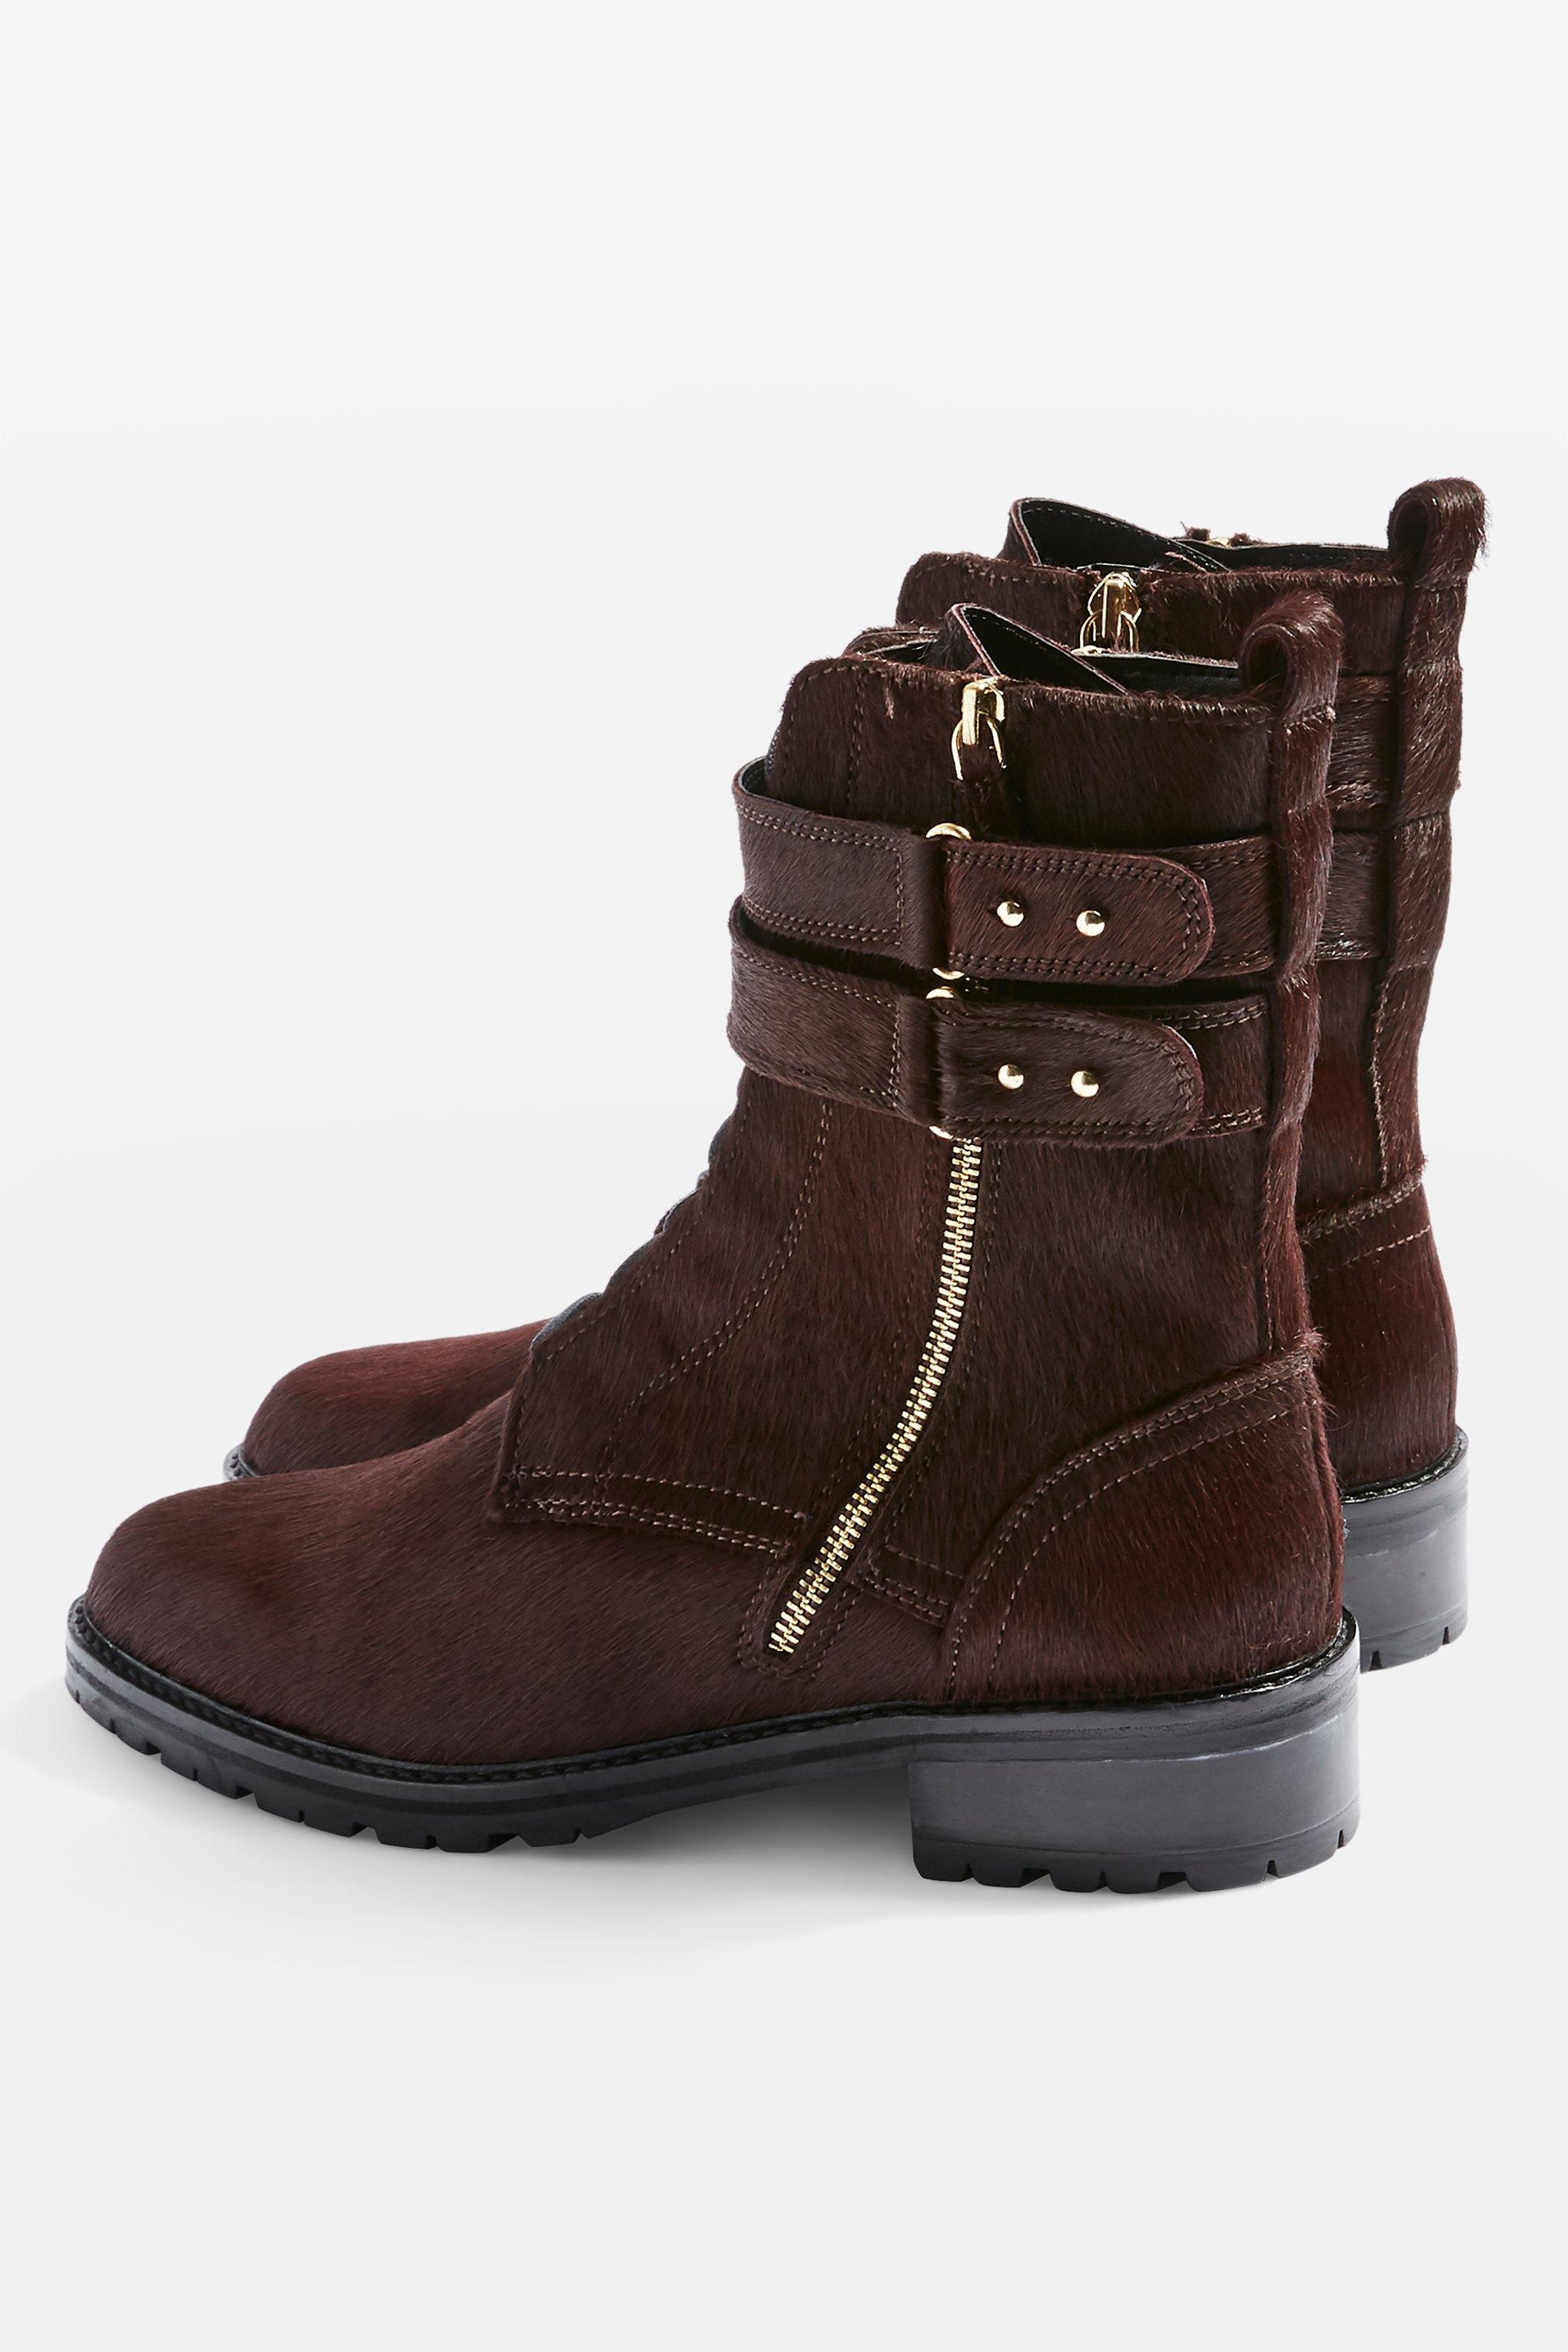 Topshop Ashley Hiker Boots Top Sellers, 58% OFF | www.naudin.be